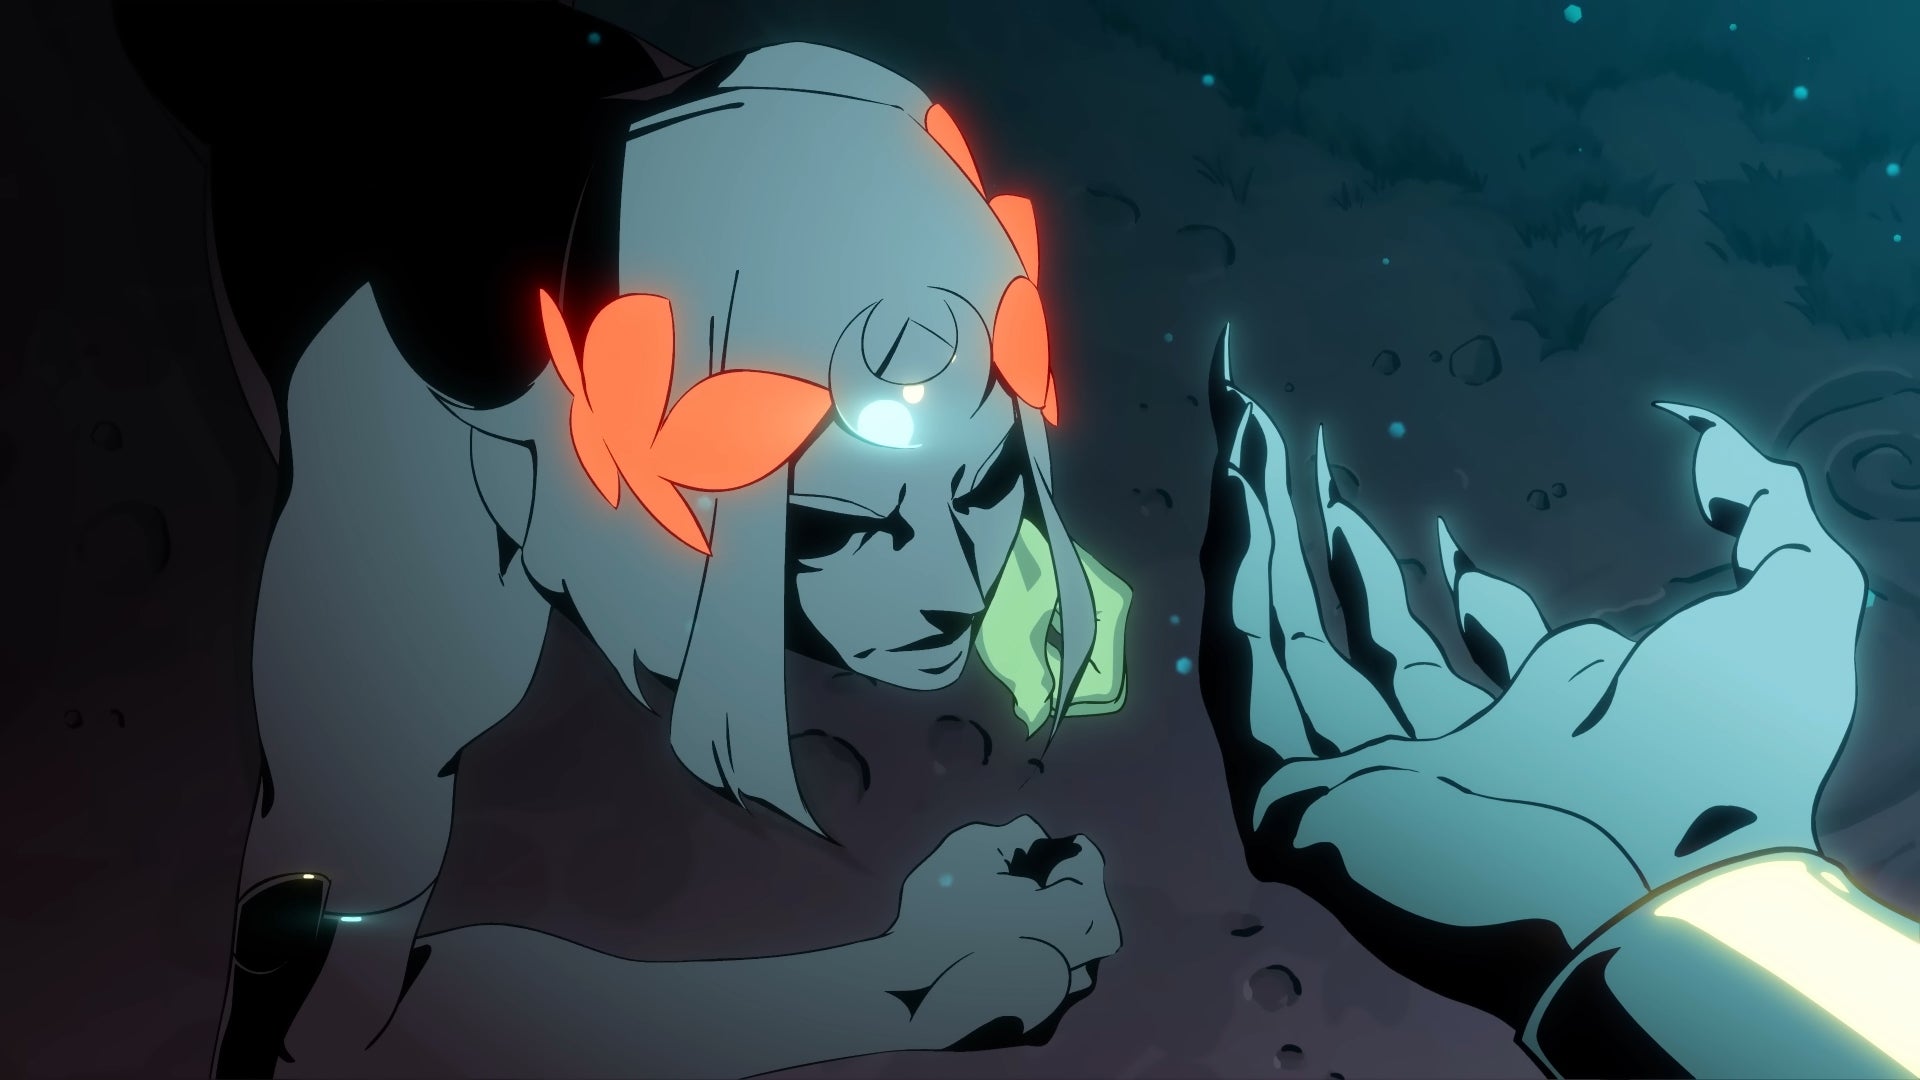 Supergiant Games is bringing Hades to Steam Early Access on